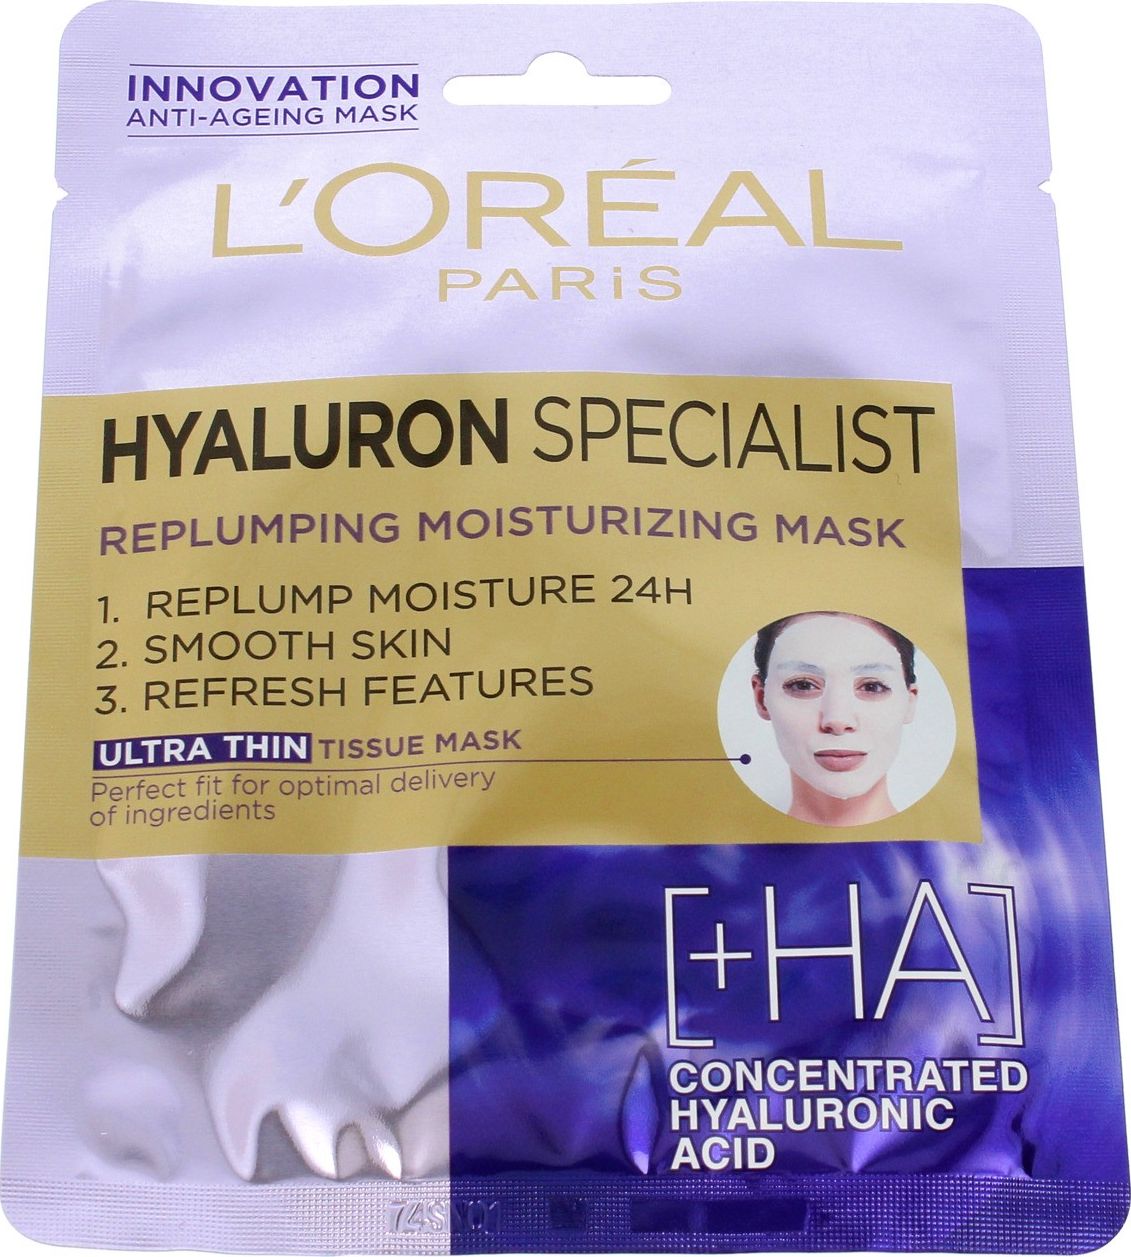 L'Oreal Paris LOREAL_Hyaluron Specialist Replumping Moisturizing Mask  30g